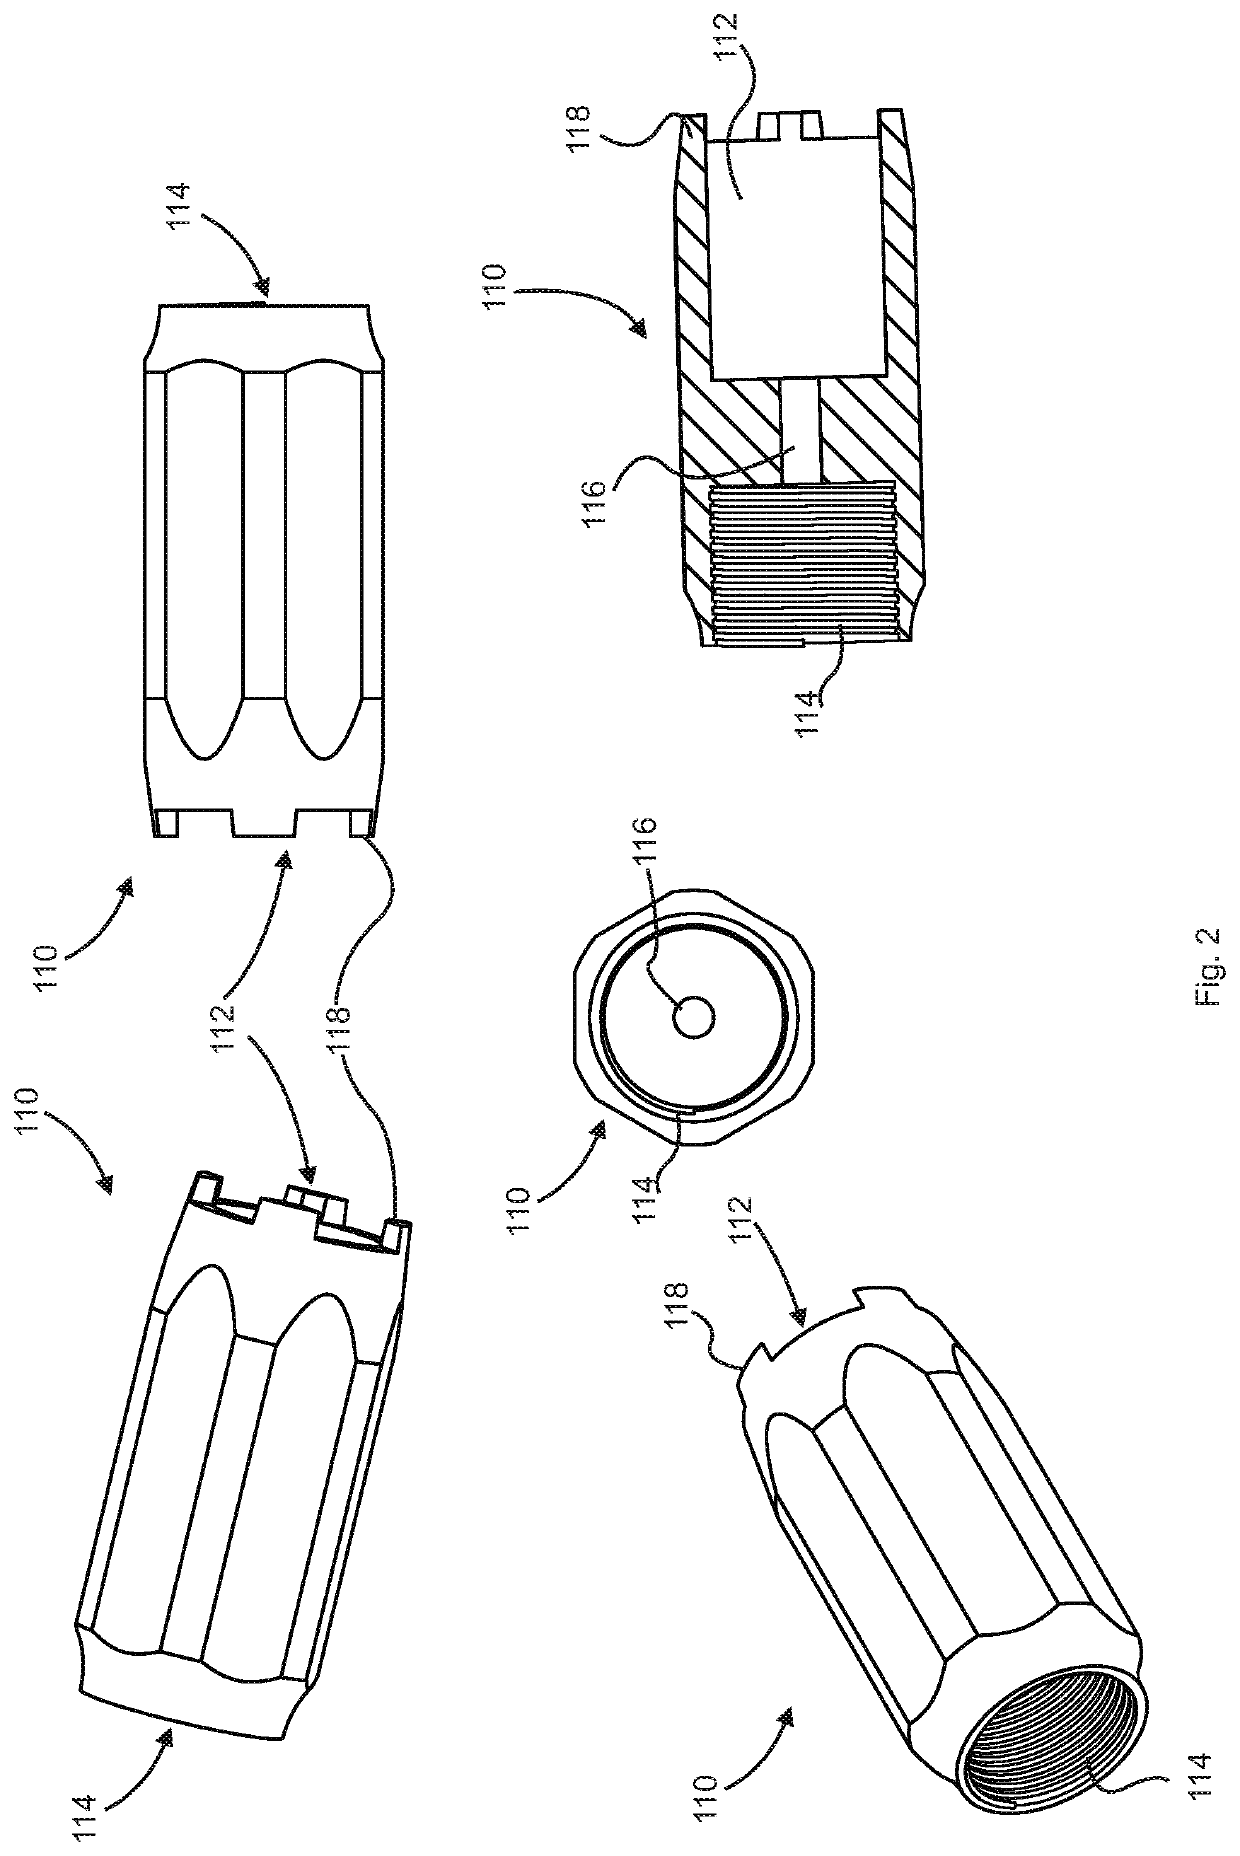 System and method for efficient and ergonomic waterproofing of joints and fasteners